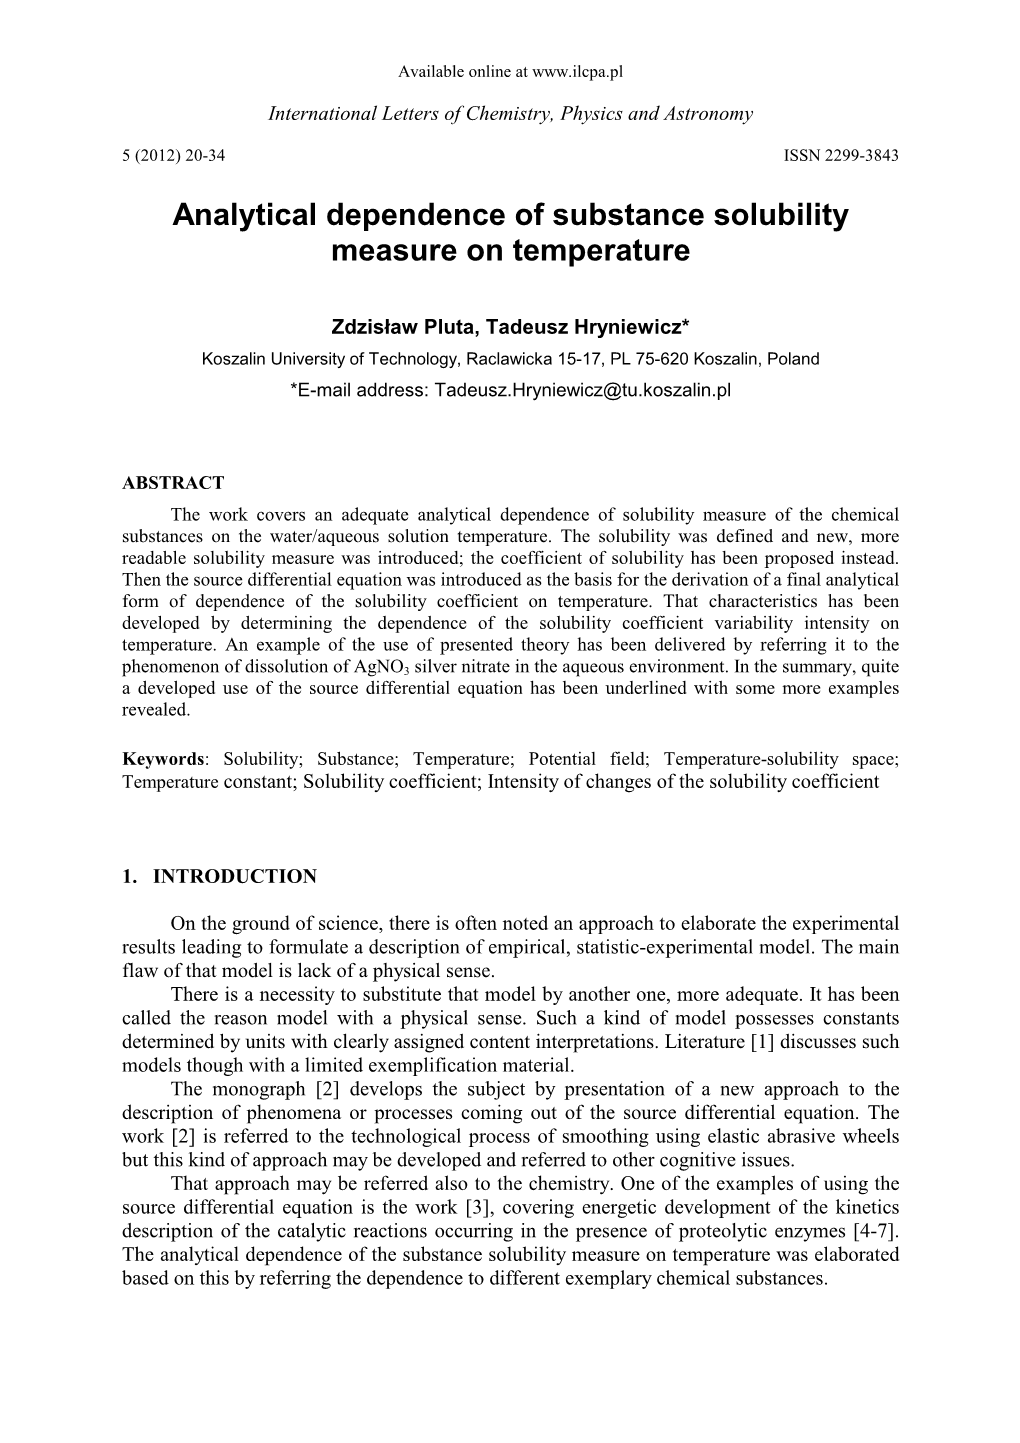 Analytical Dependence of Substance Solubility Measure on Temperature